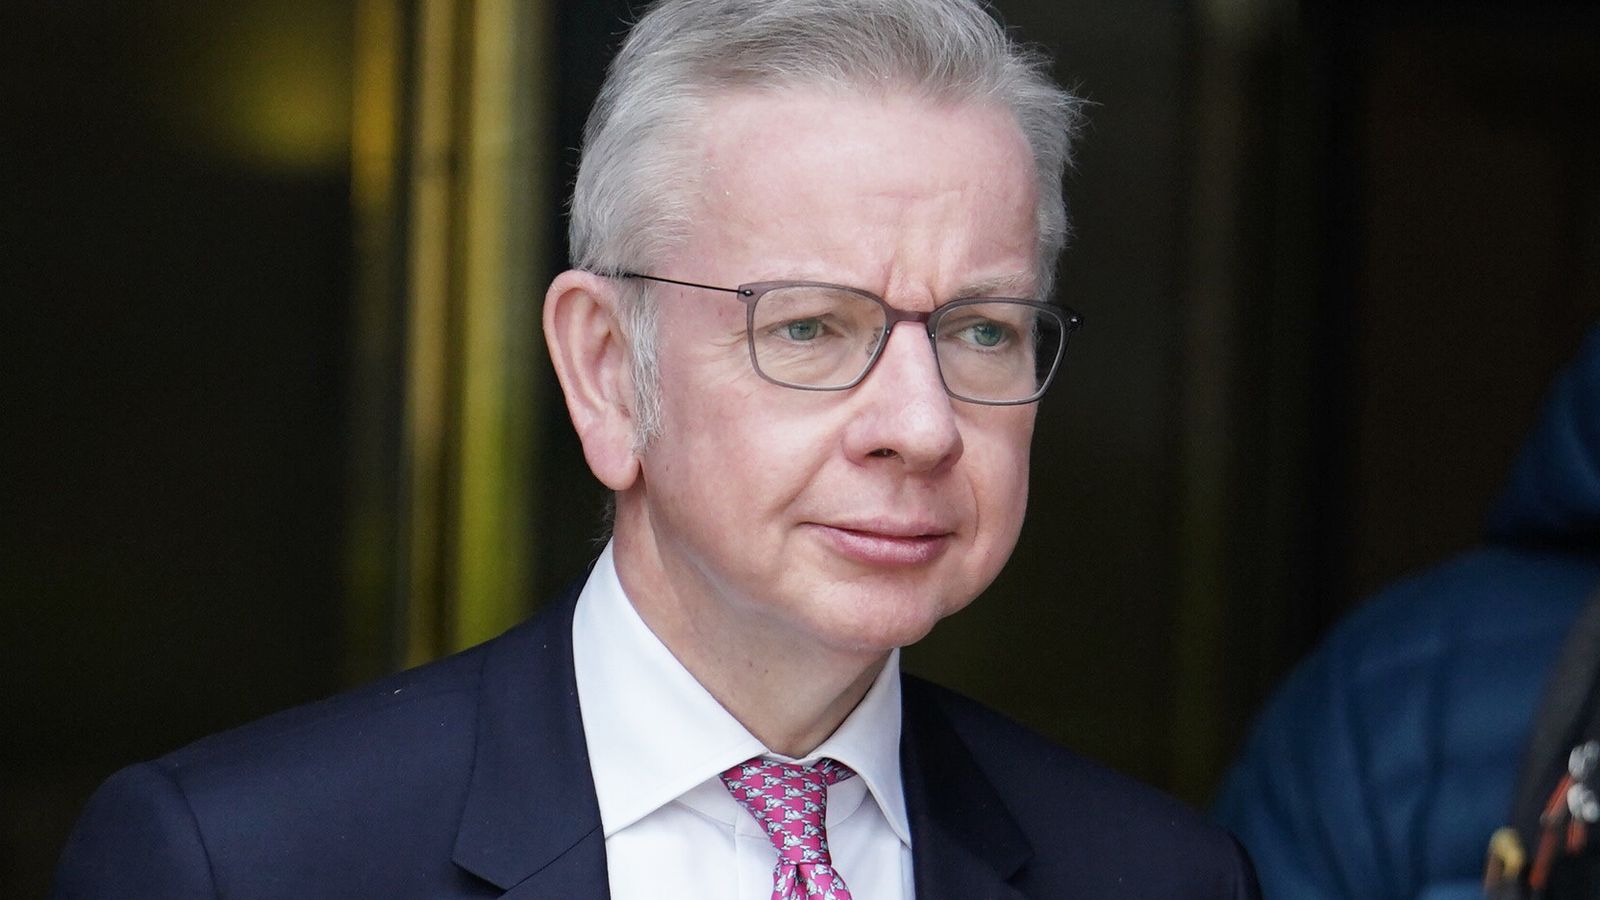 Michael Gove names far-right and Islamist groups which could fall under fresh extremism definition